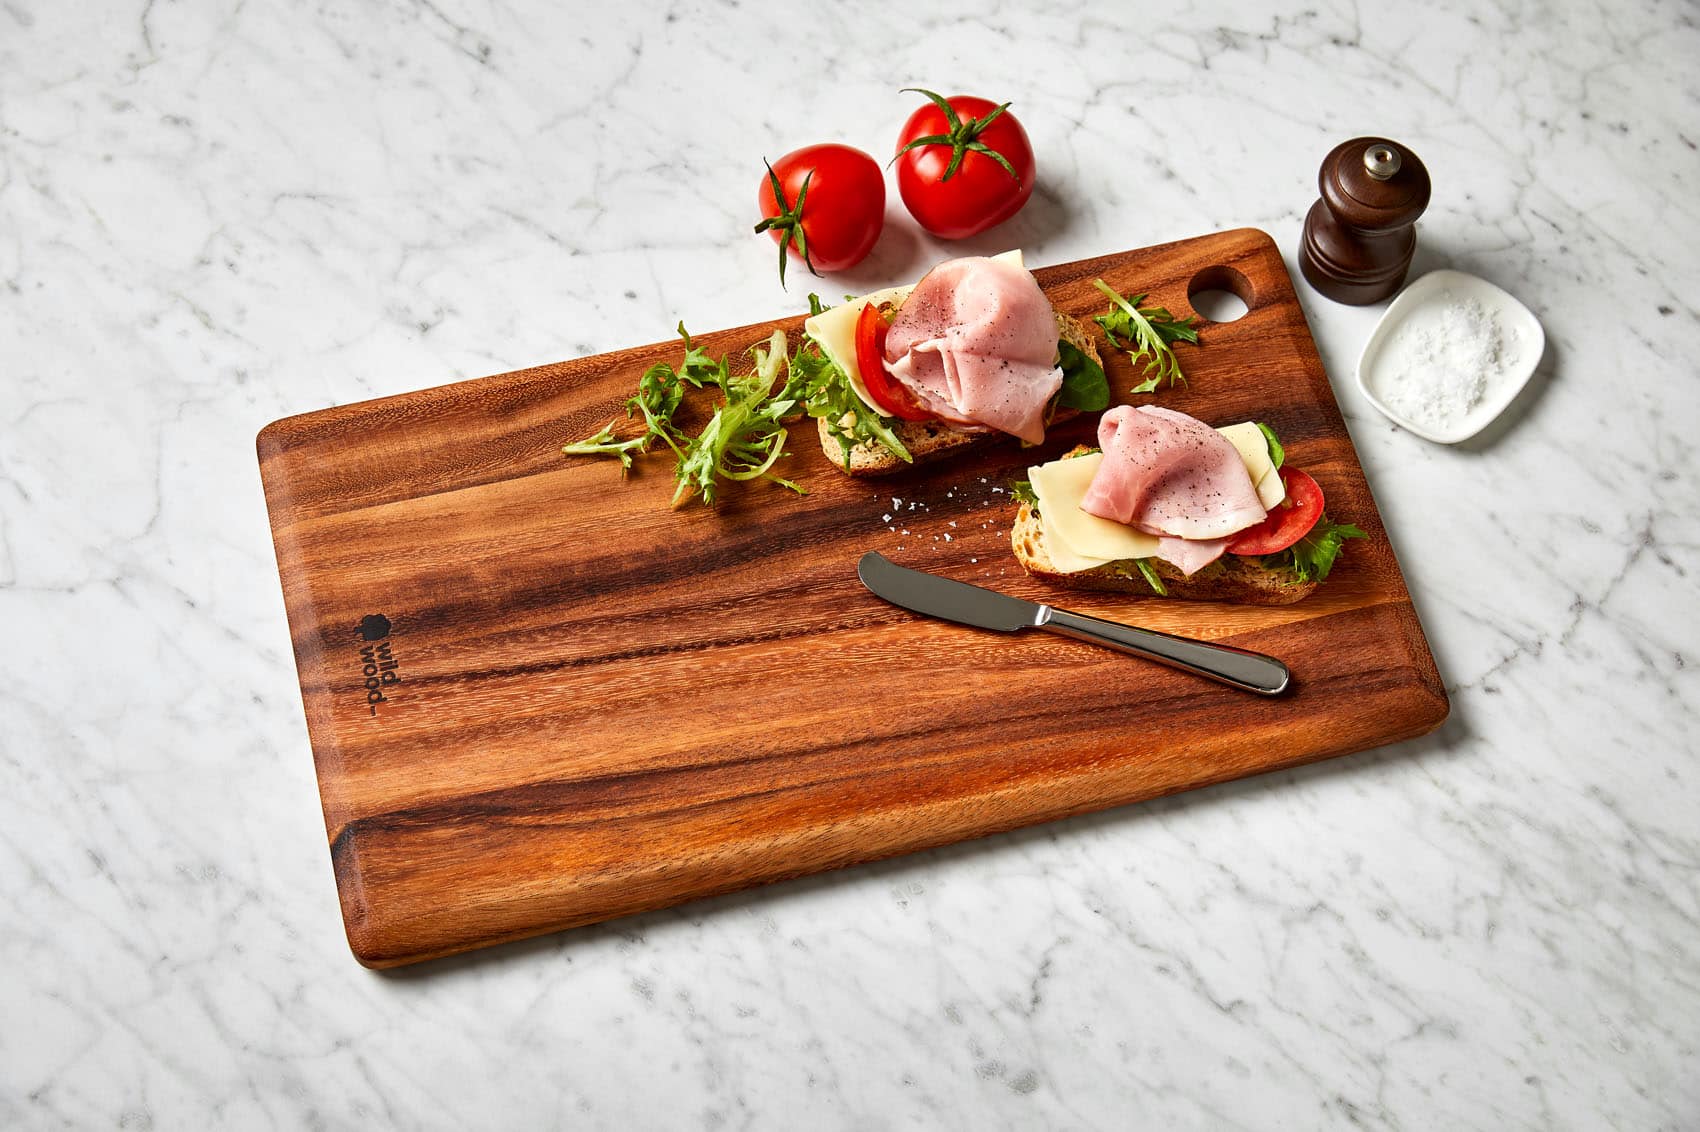 https://www.wildwood.com.au/wp-content/uploads/2019/07/WCB203-Wild-Wood-Noosa-Everyday-Cutting-Serving-Board_high-res_May2020_version_1.jpg